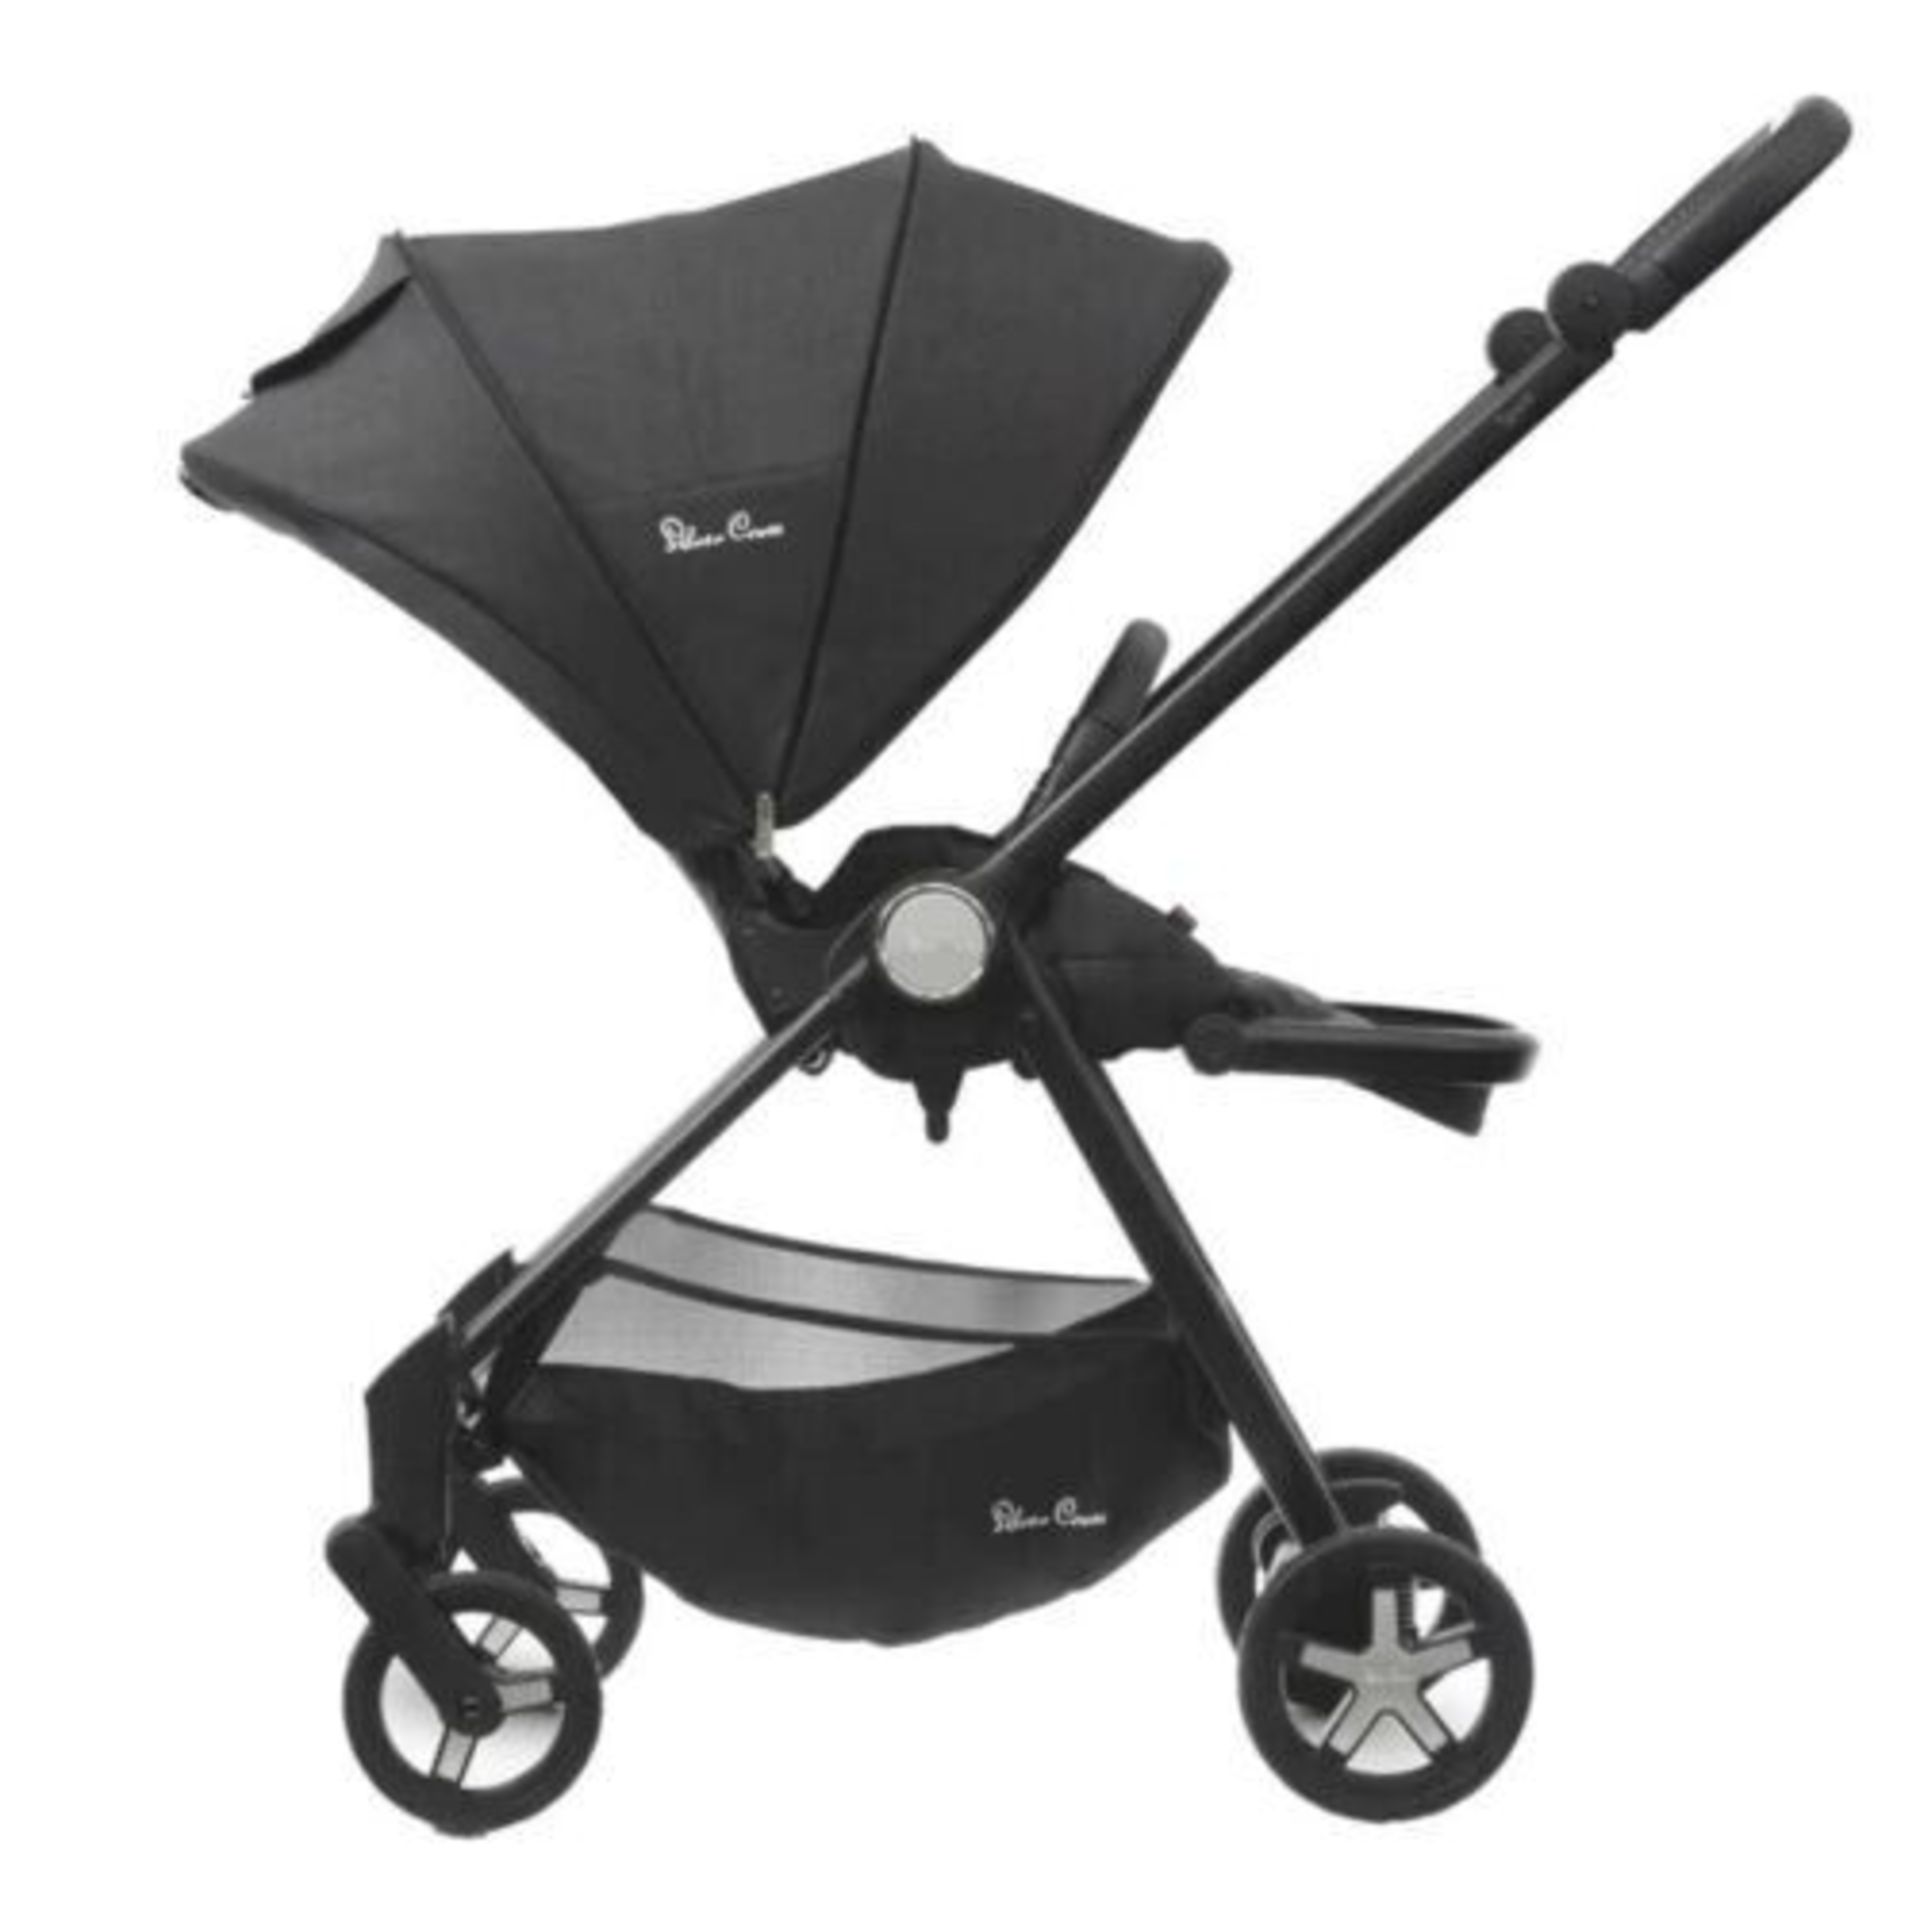 New Boxed Silver Cross Spirit 2 in 1 Pushchair-Onyx. Spirit is perfect for agile city living, - Image 2 of 4